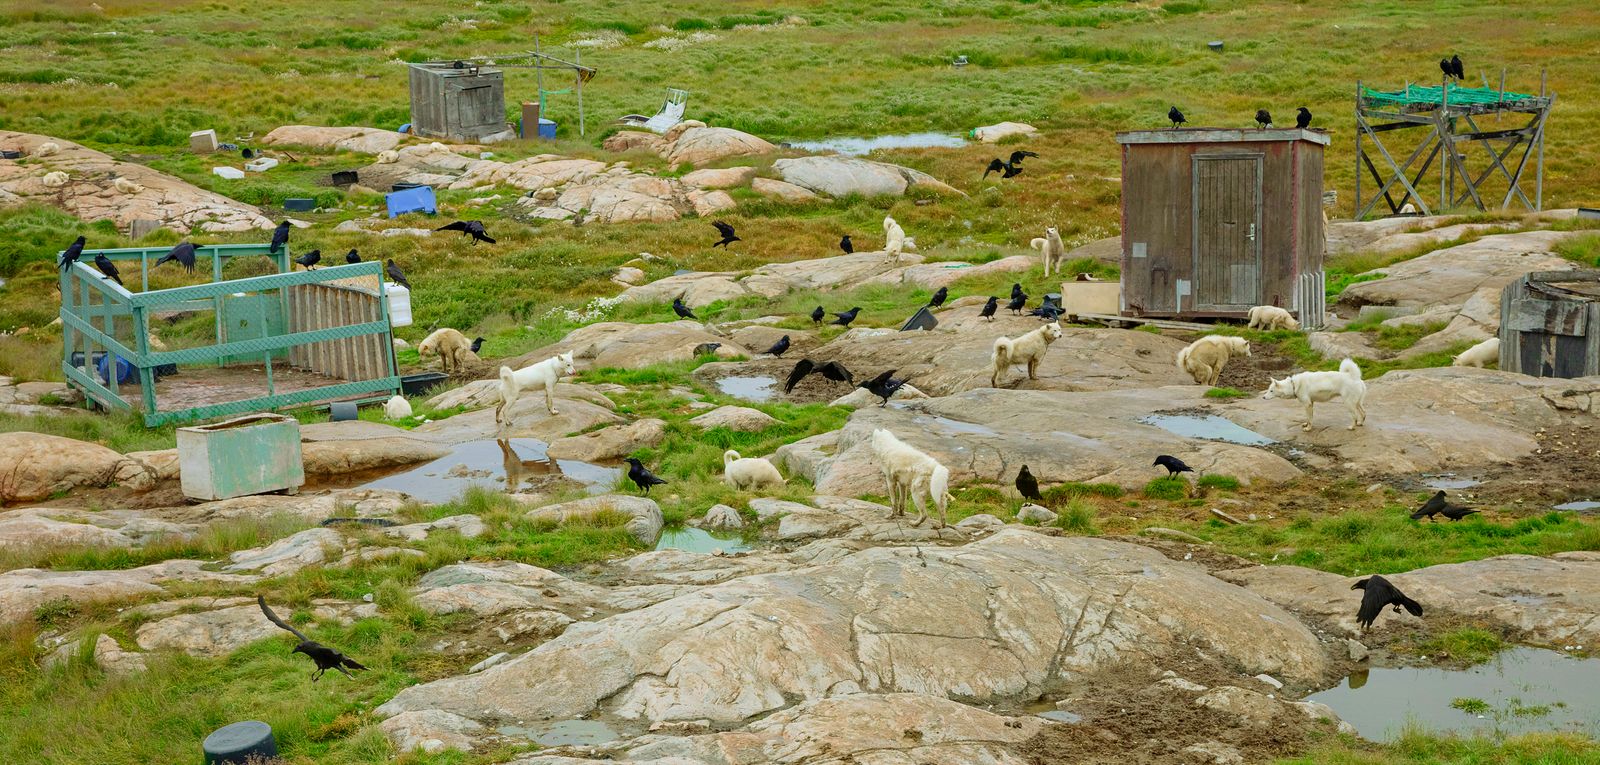 © Victoria Crayhon - Untitled Greenland I, (Sled Dogs with Crows) 2022, archival pigment print, 44 x 90 inches